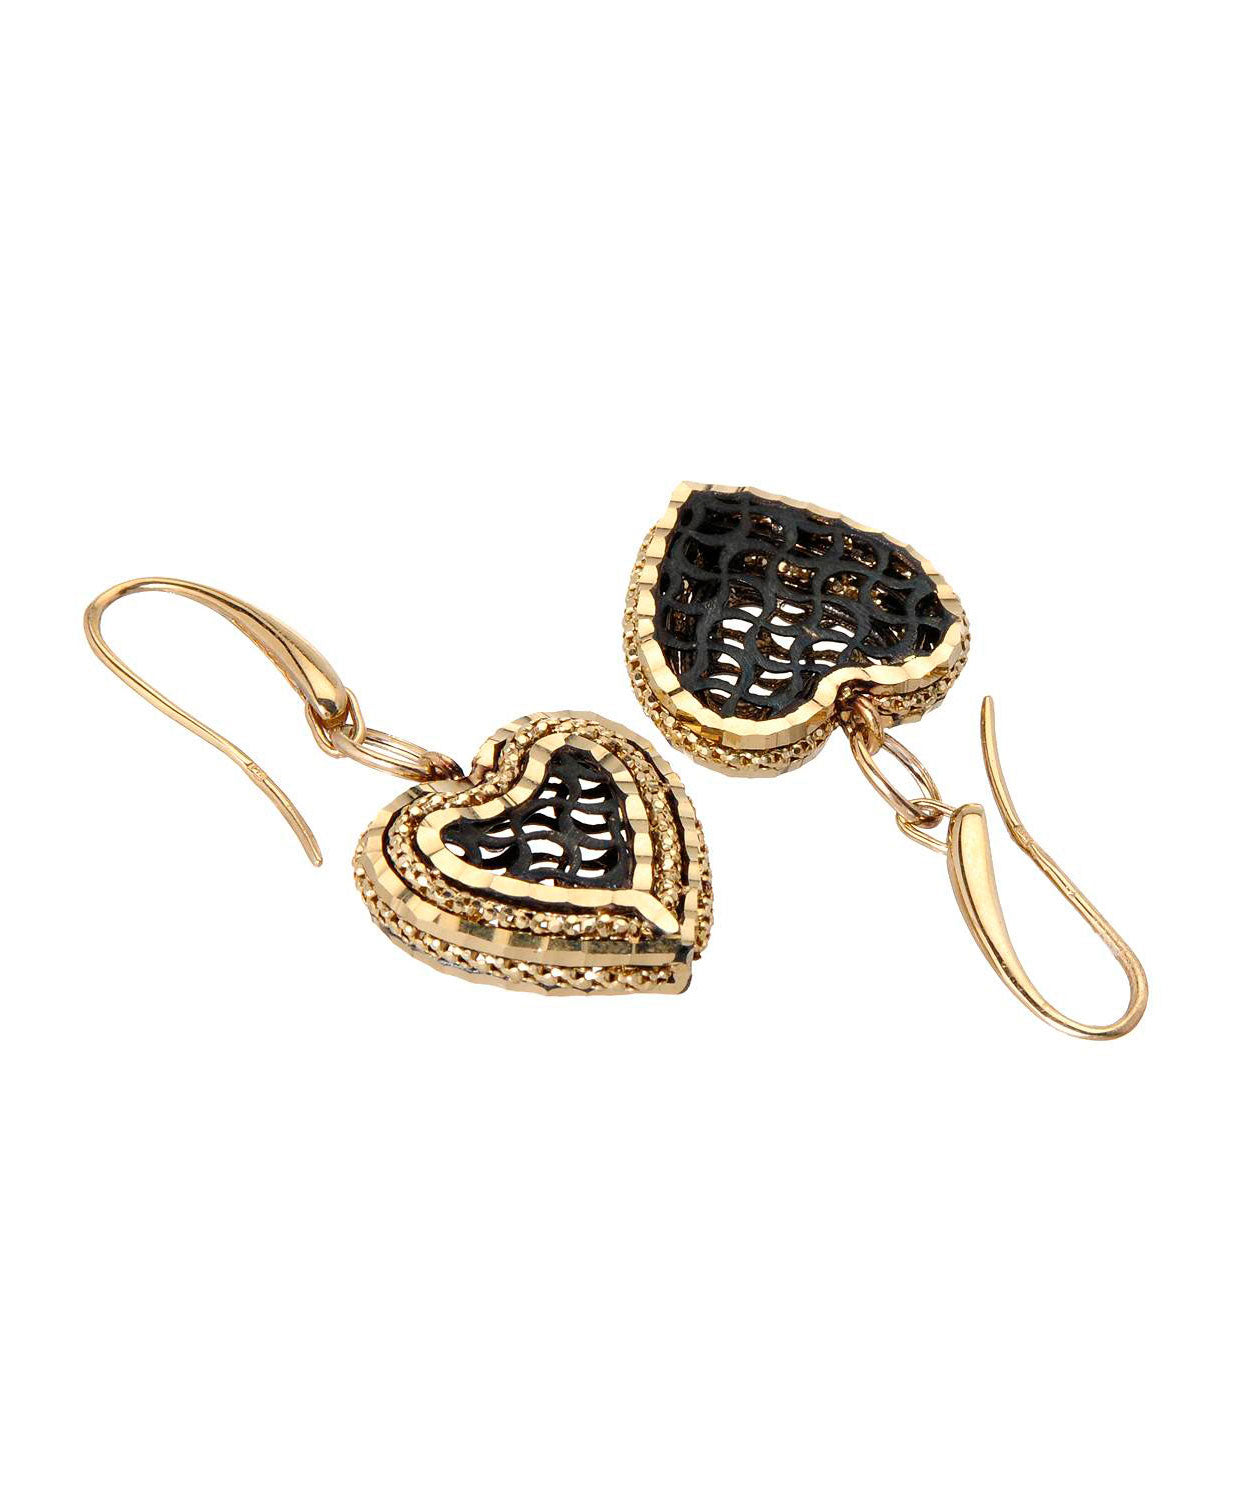 14k Gold Heart Dangle Earrings - Made in Italy View 2